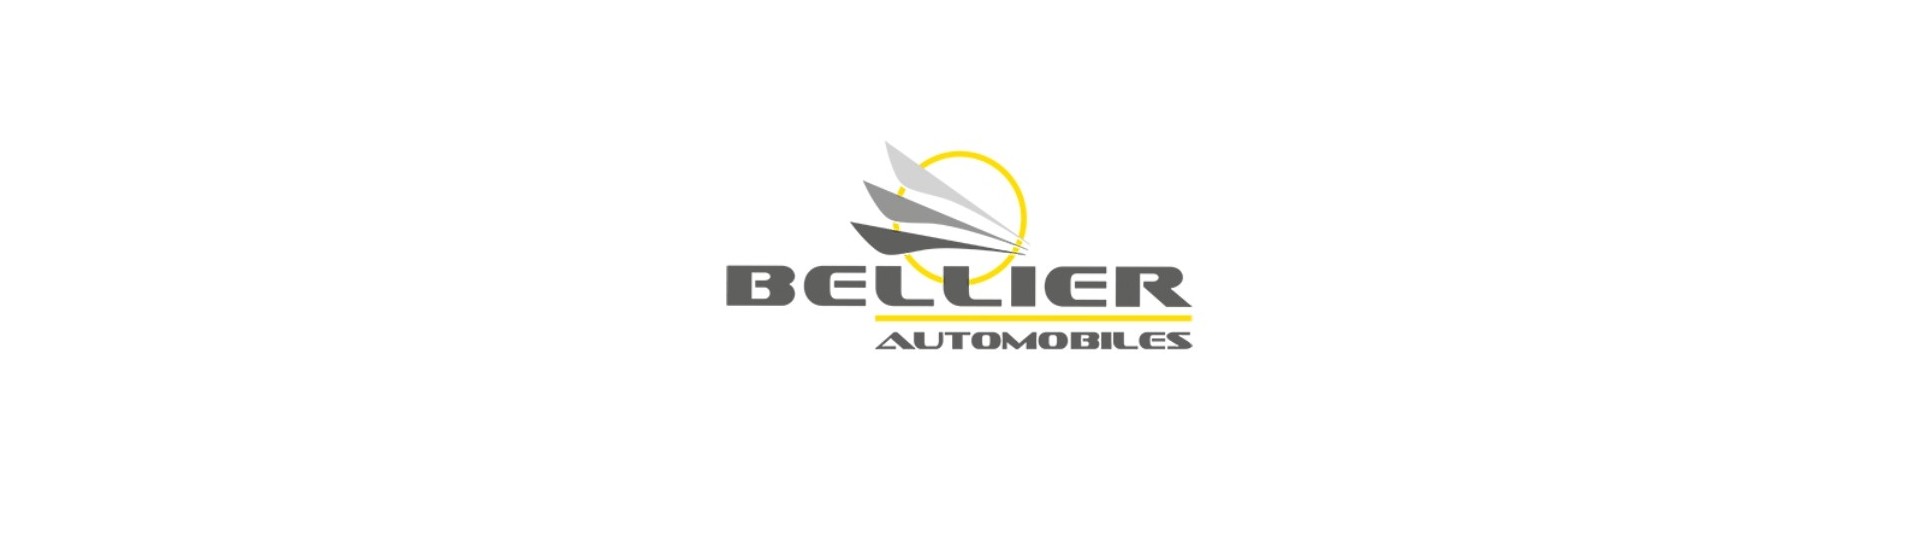 Steering column at best price for car without a permit Bellier